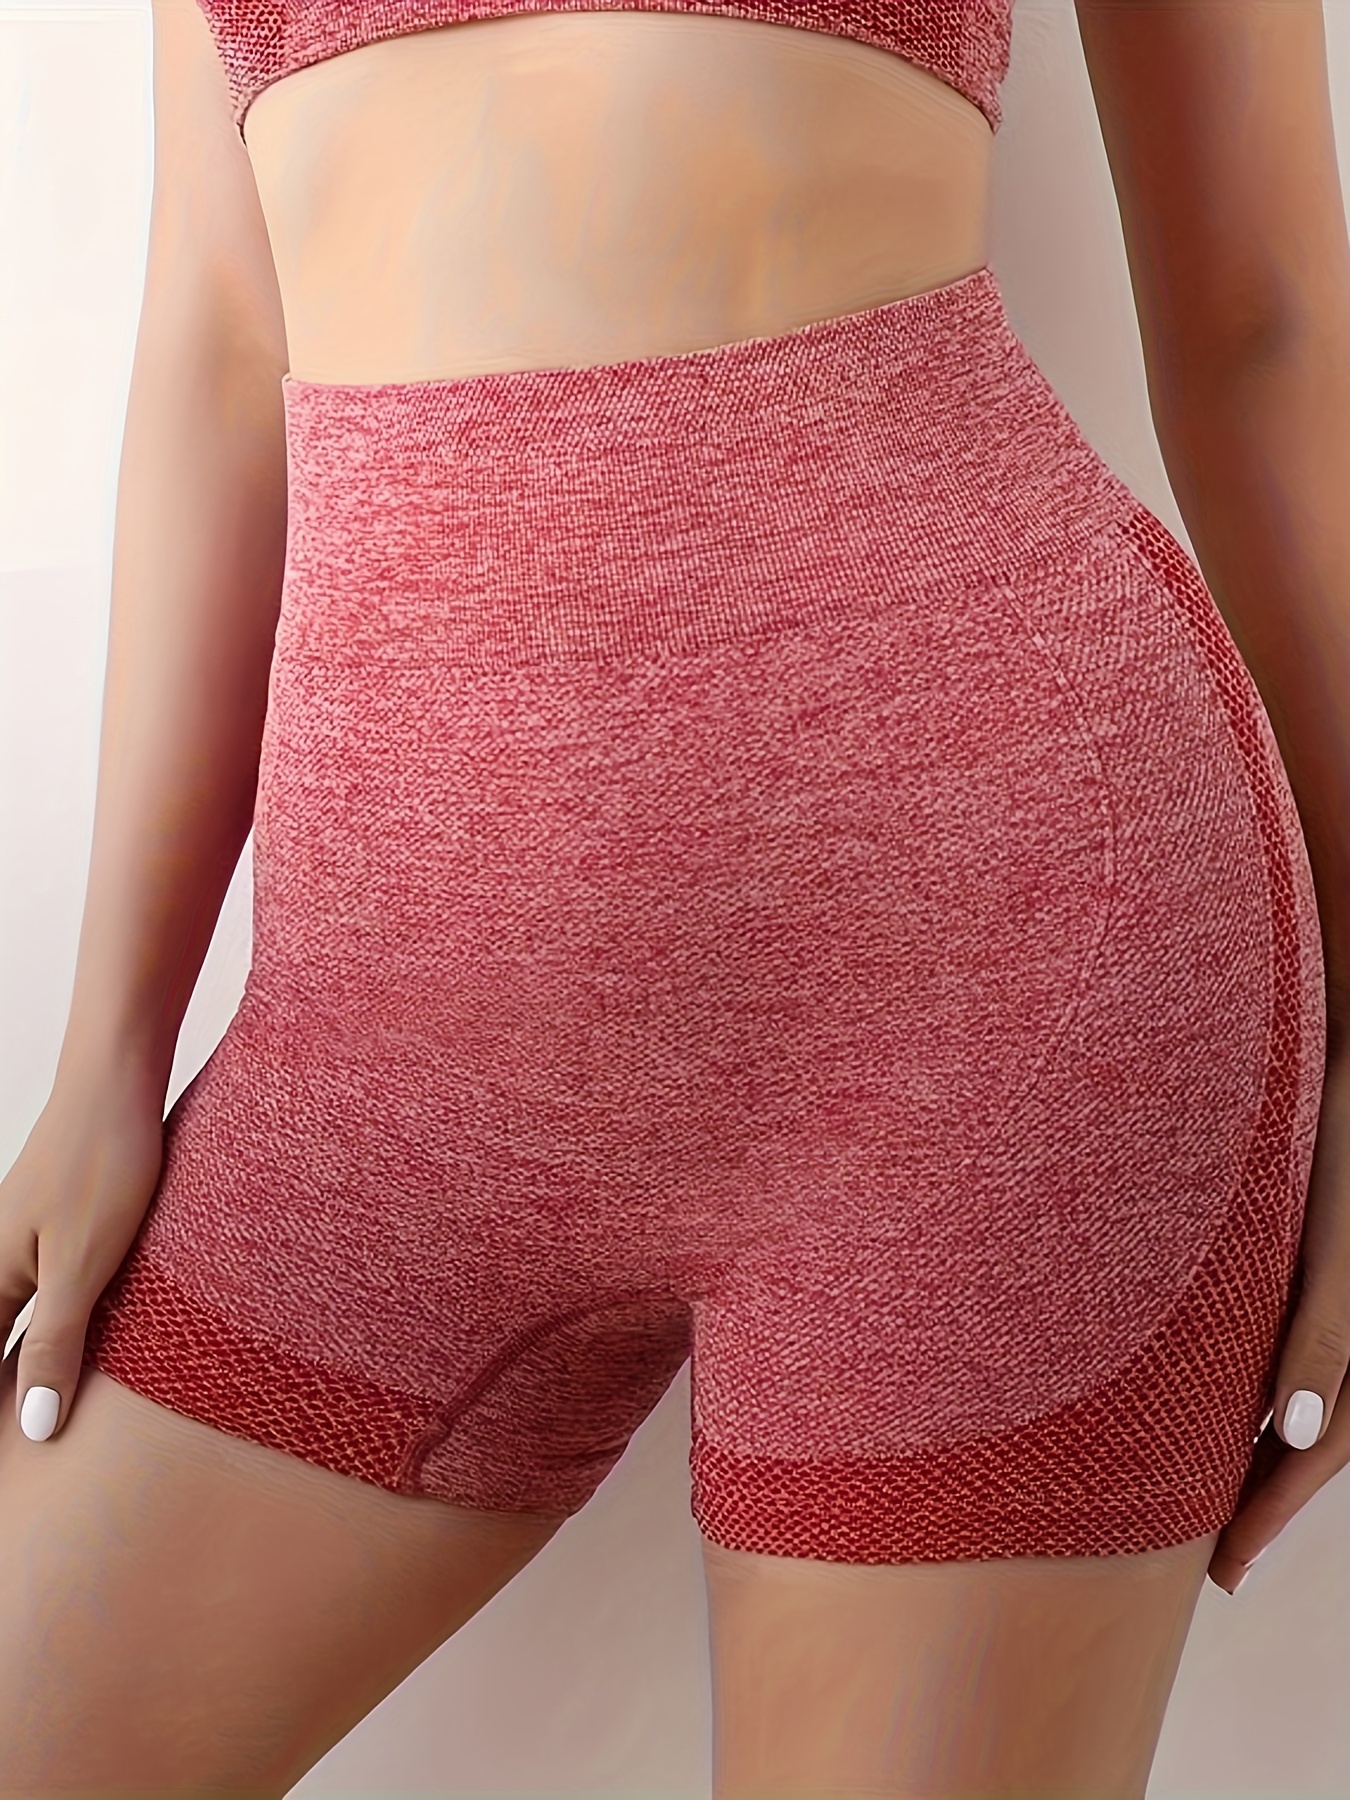 Women's Cardio Fitness High-Waisted Shaping Shorts - Pink